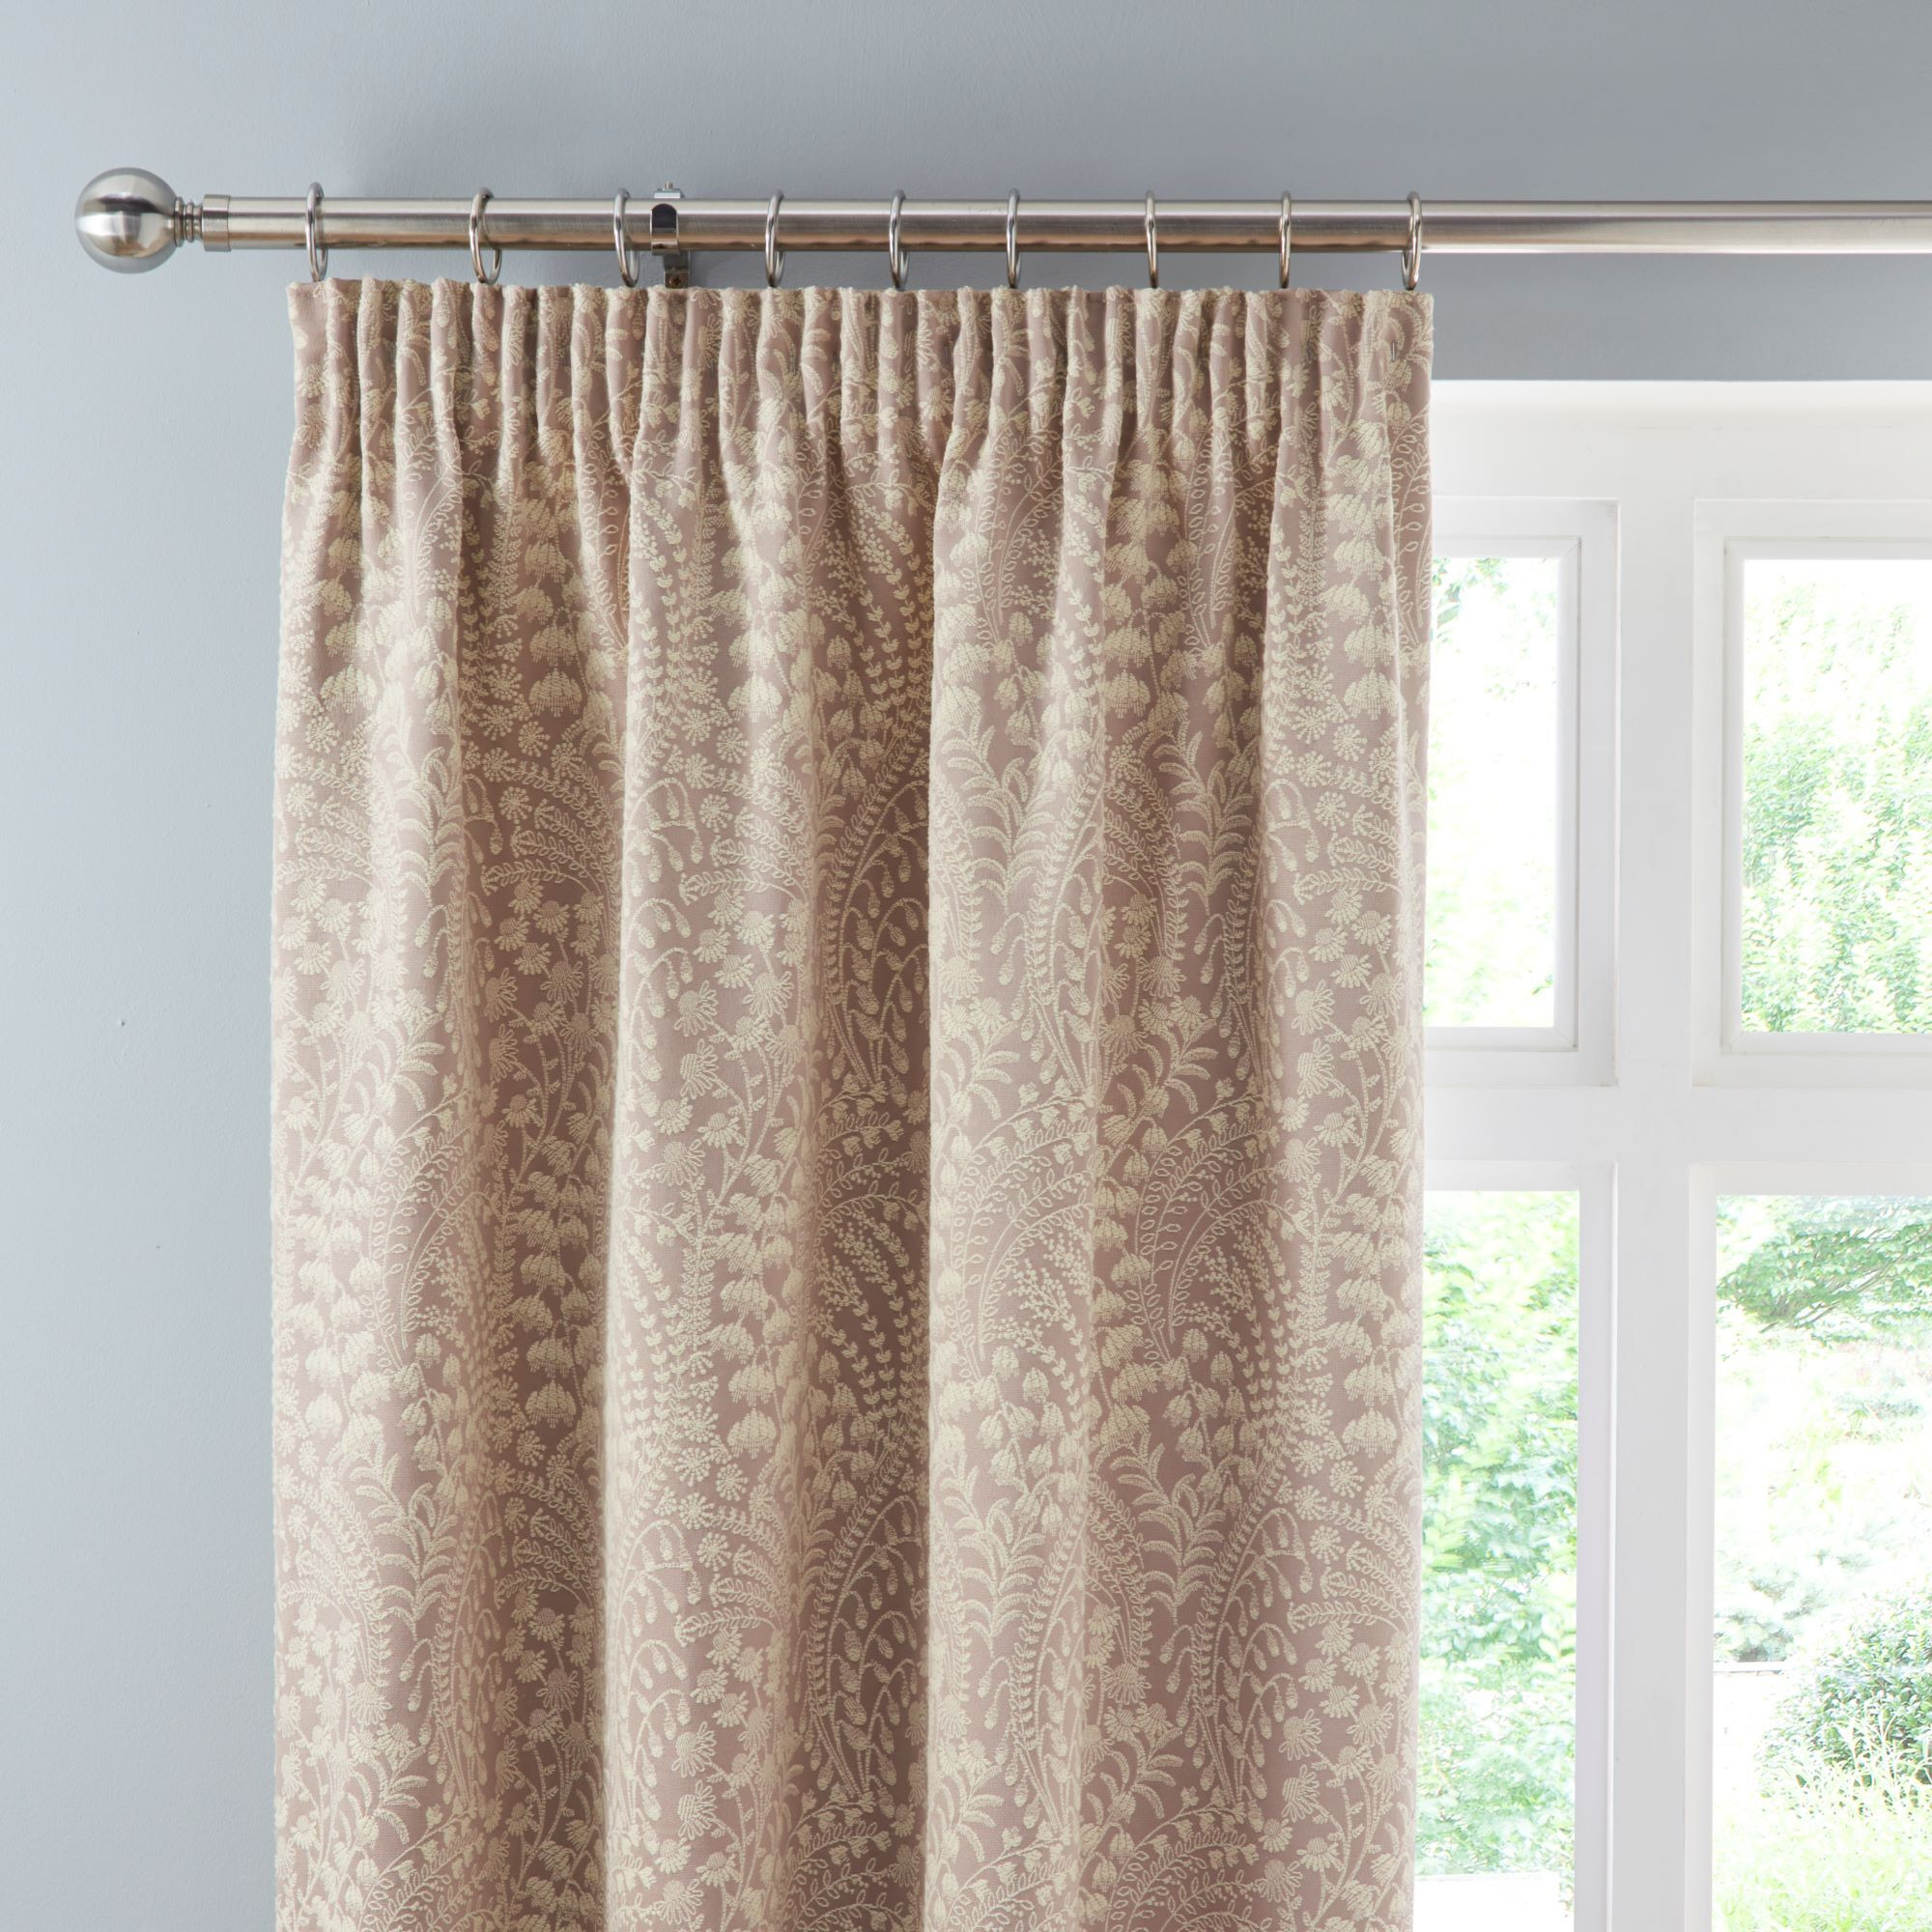 Spring Flowers Natural Pencil Pleat Curtains Natural